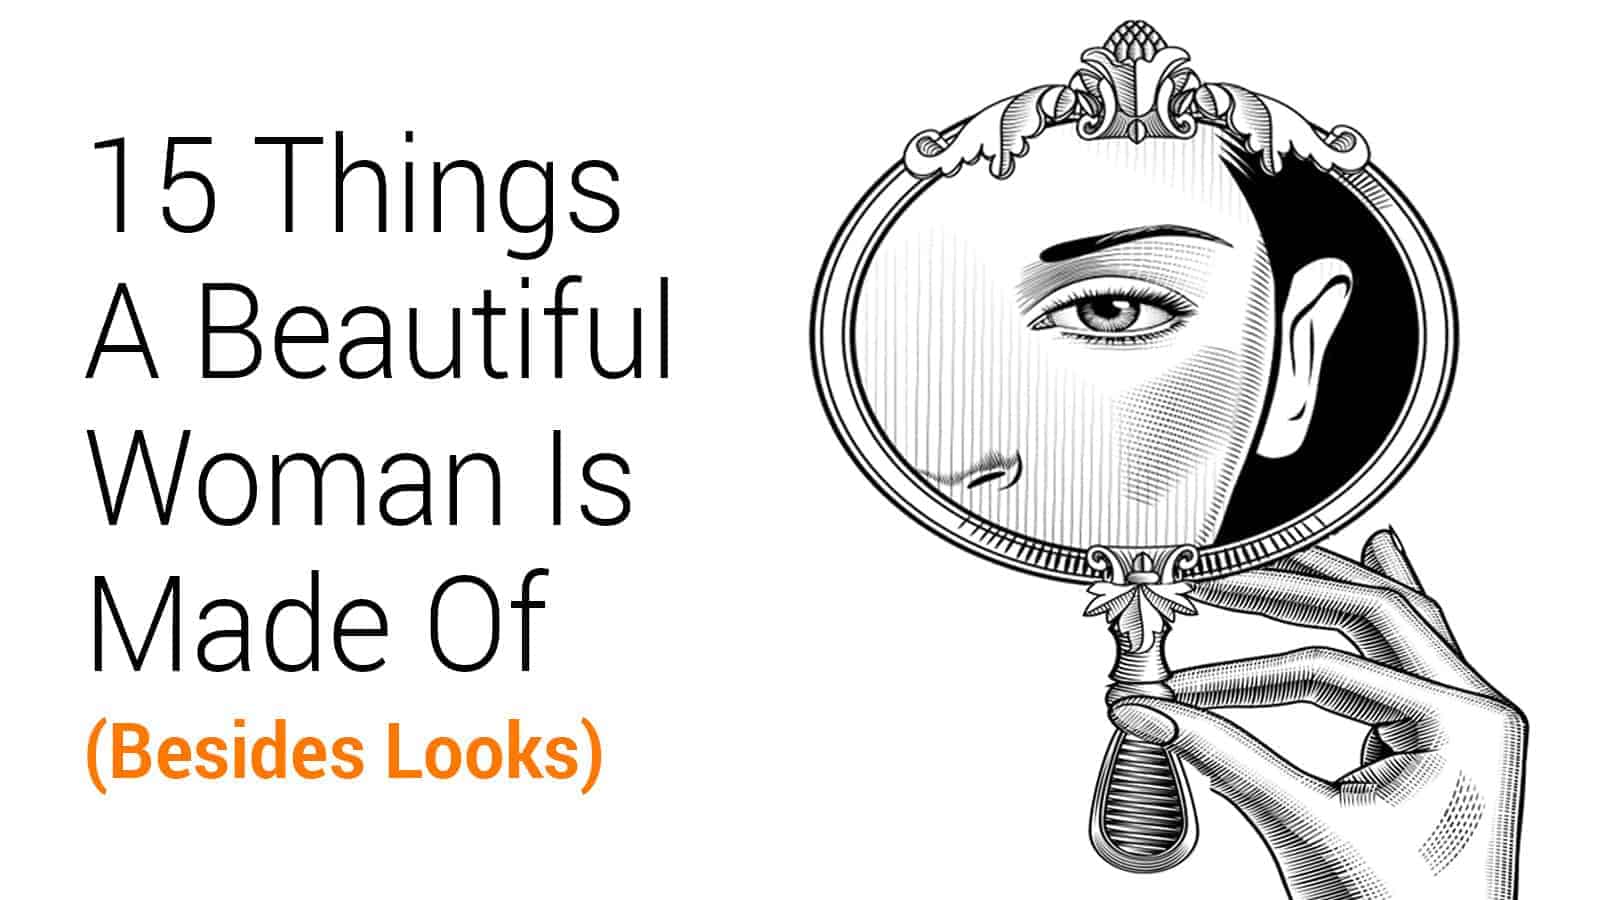 15 Things A Beautiful Woman Is Made Of (Besides Looks)